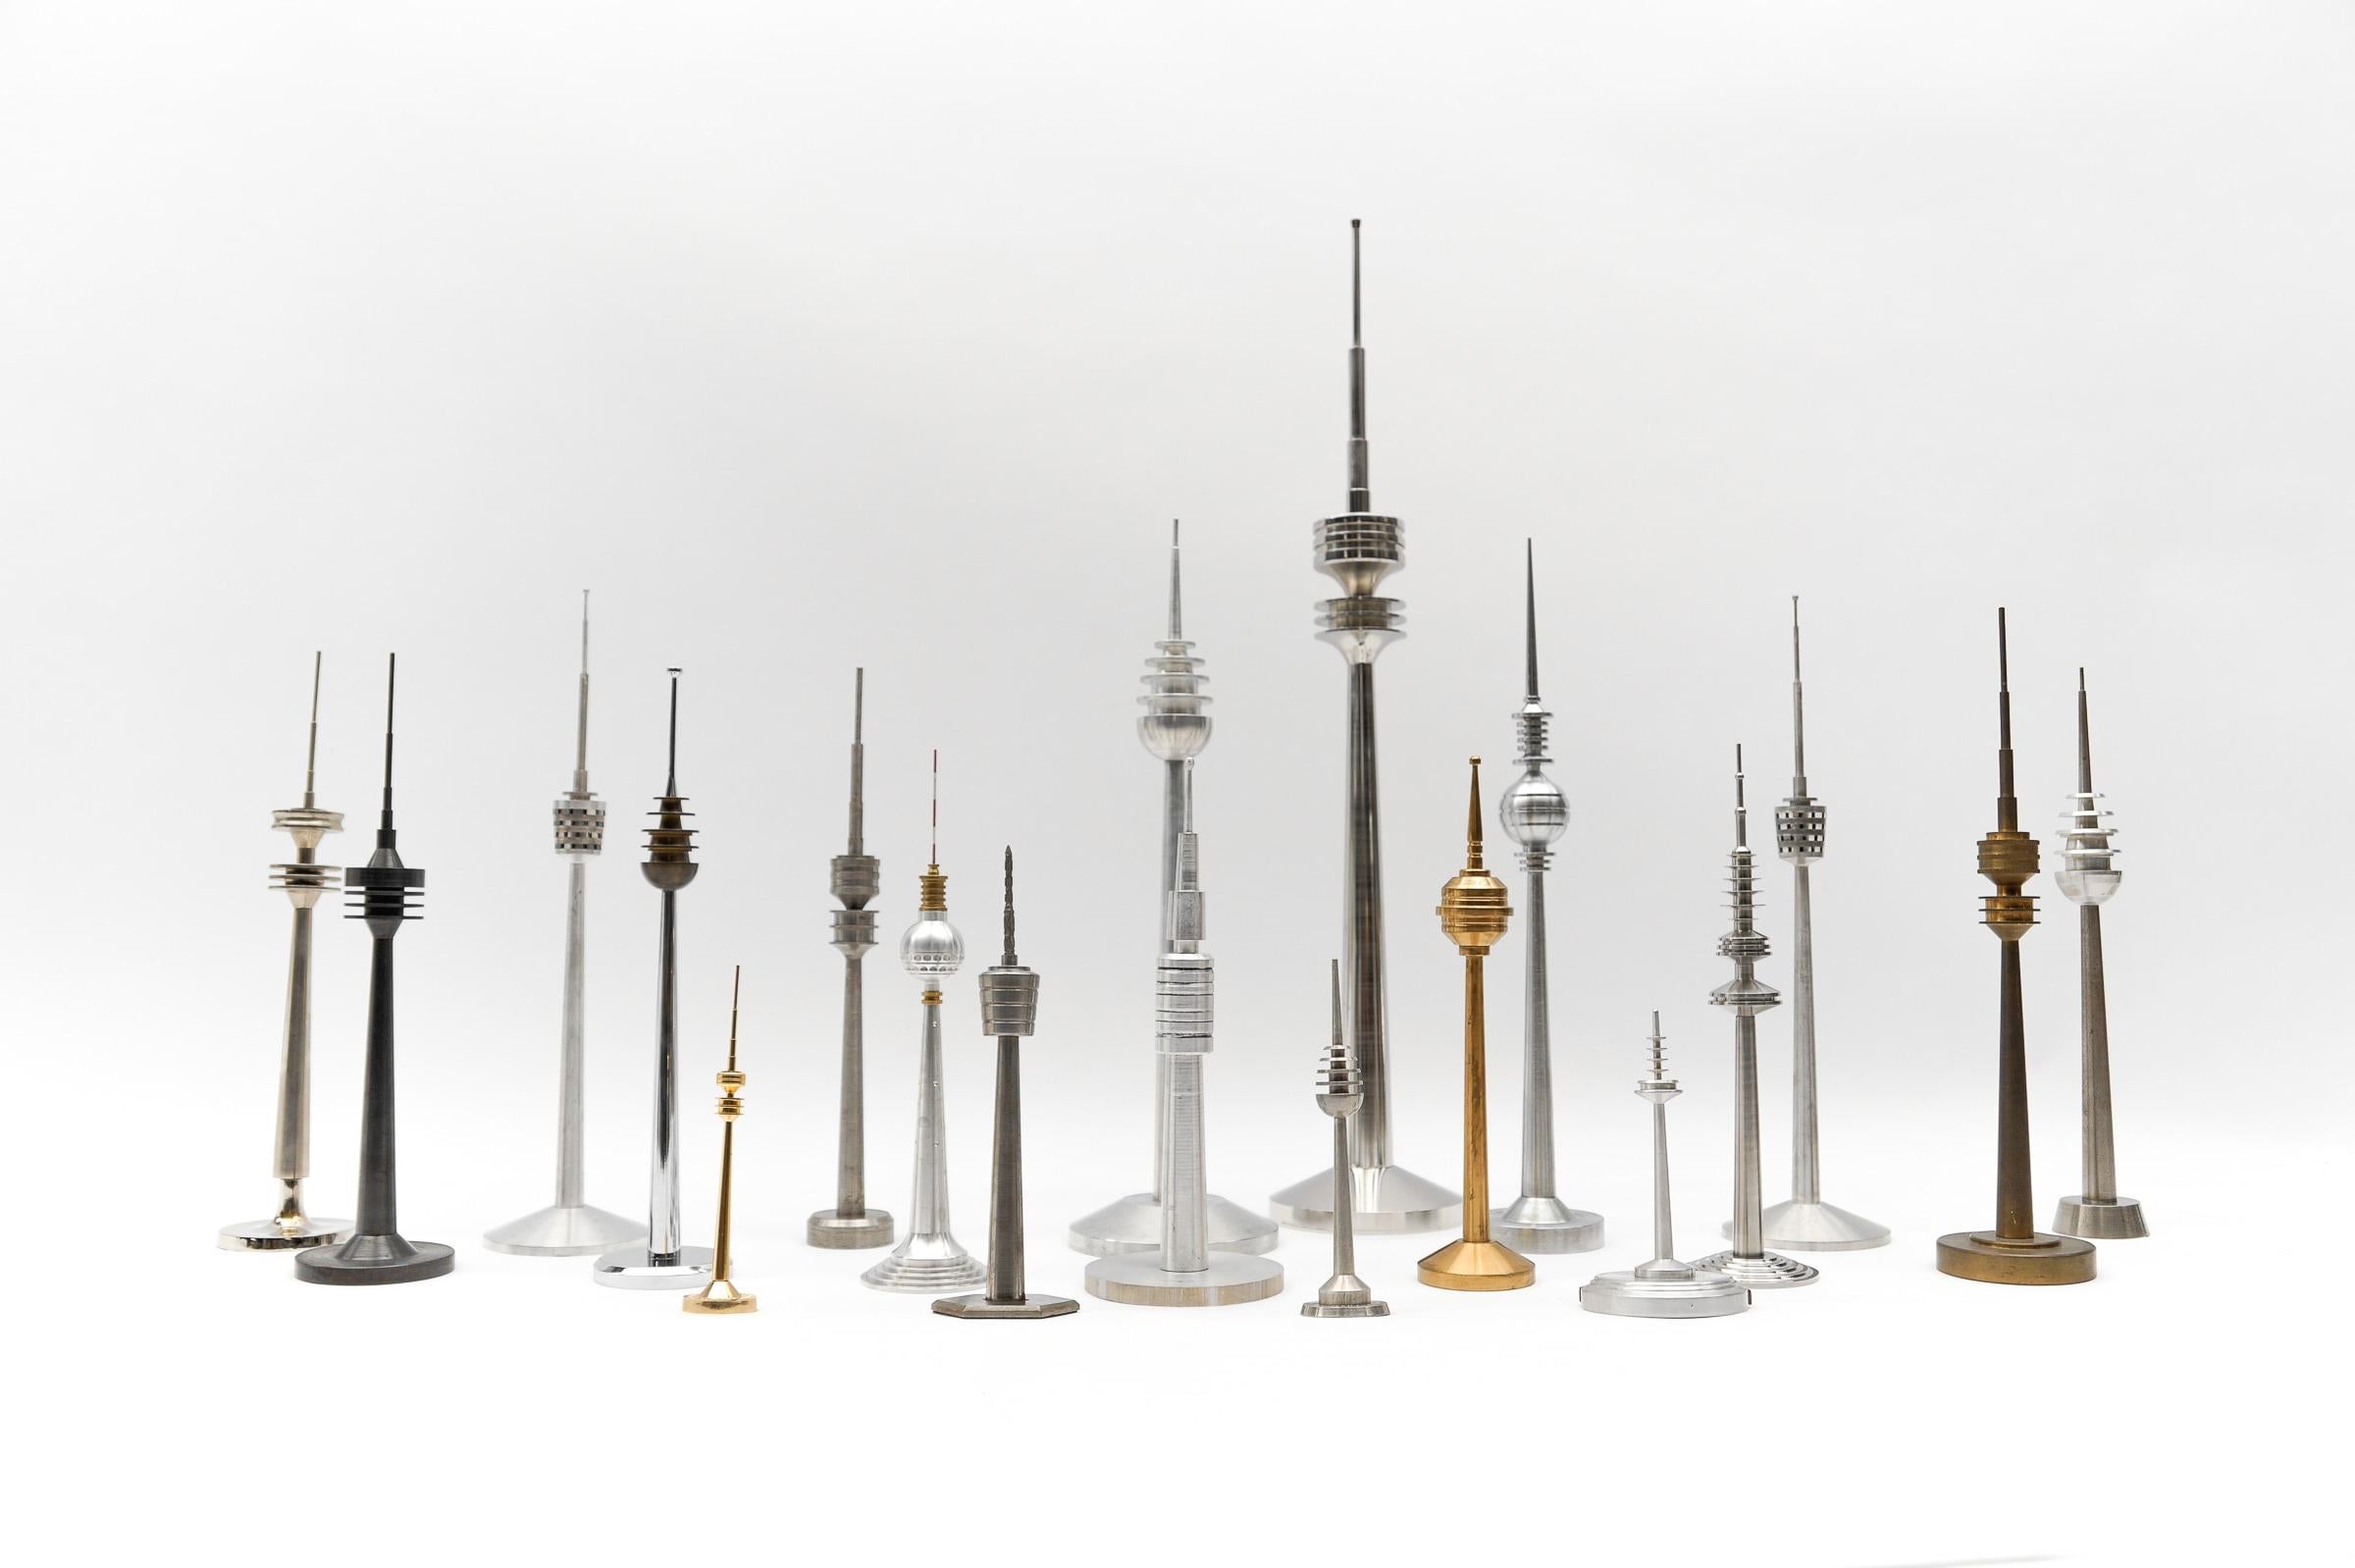 Wonderful TV towers from the 1960s-1970s. Some made of steel, metal, aluminum, bronze, etc..

Exceptionally large TV tower of 63cm.

The smallest, golden one is a ballpoint pen. The refill is empty.

Various heights from 14cm to 63cm!

Have the